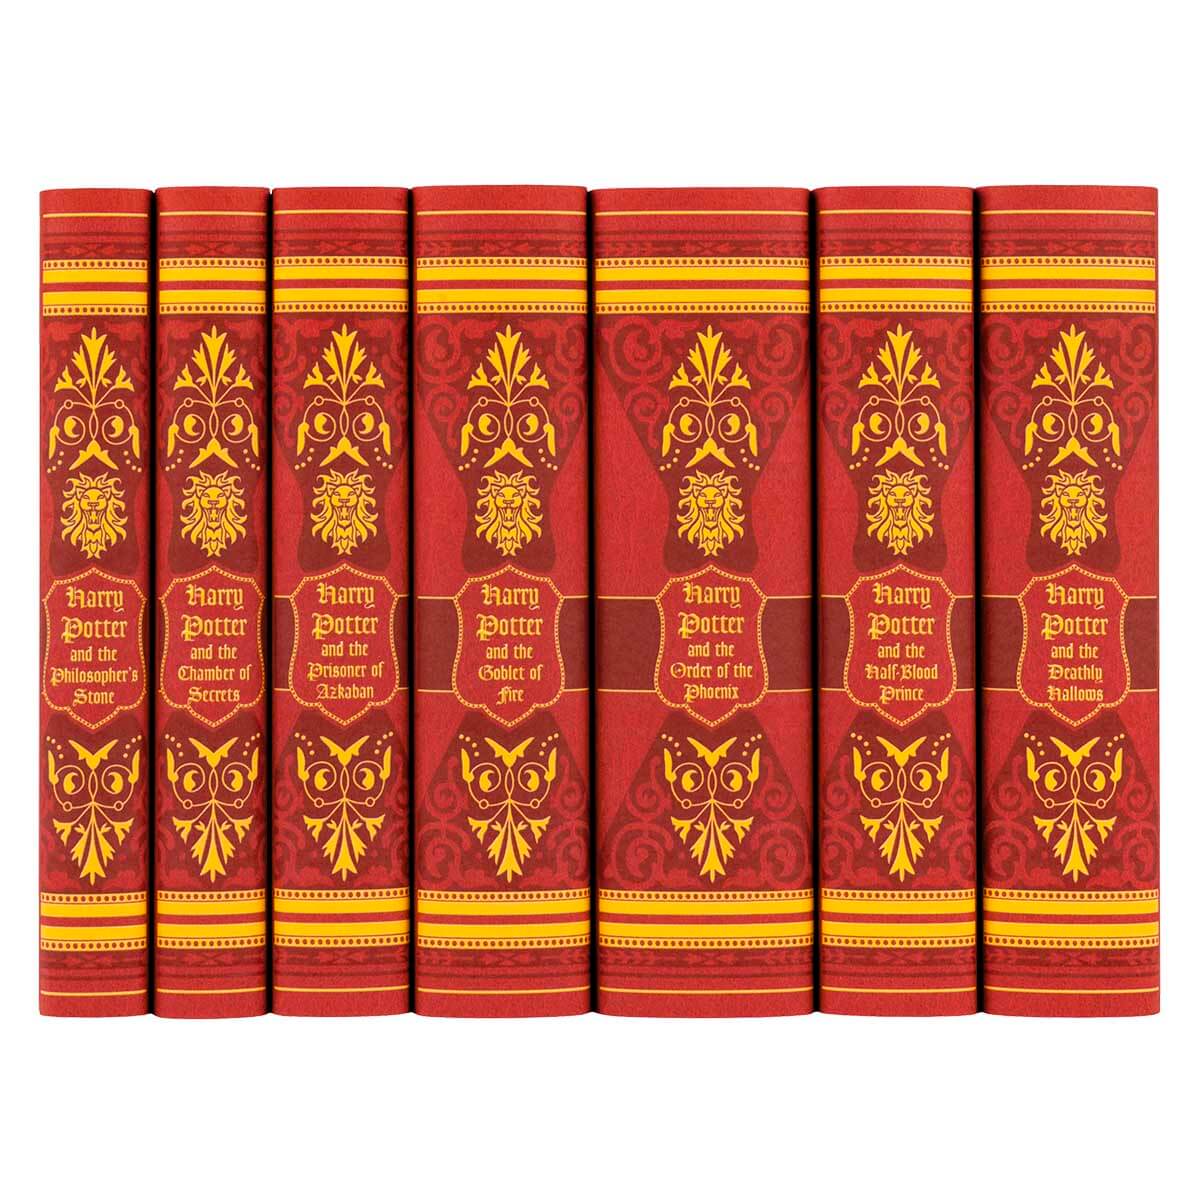 Custom Leatherbound Harry Potter Series Reserved for Joe -  New Zealand